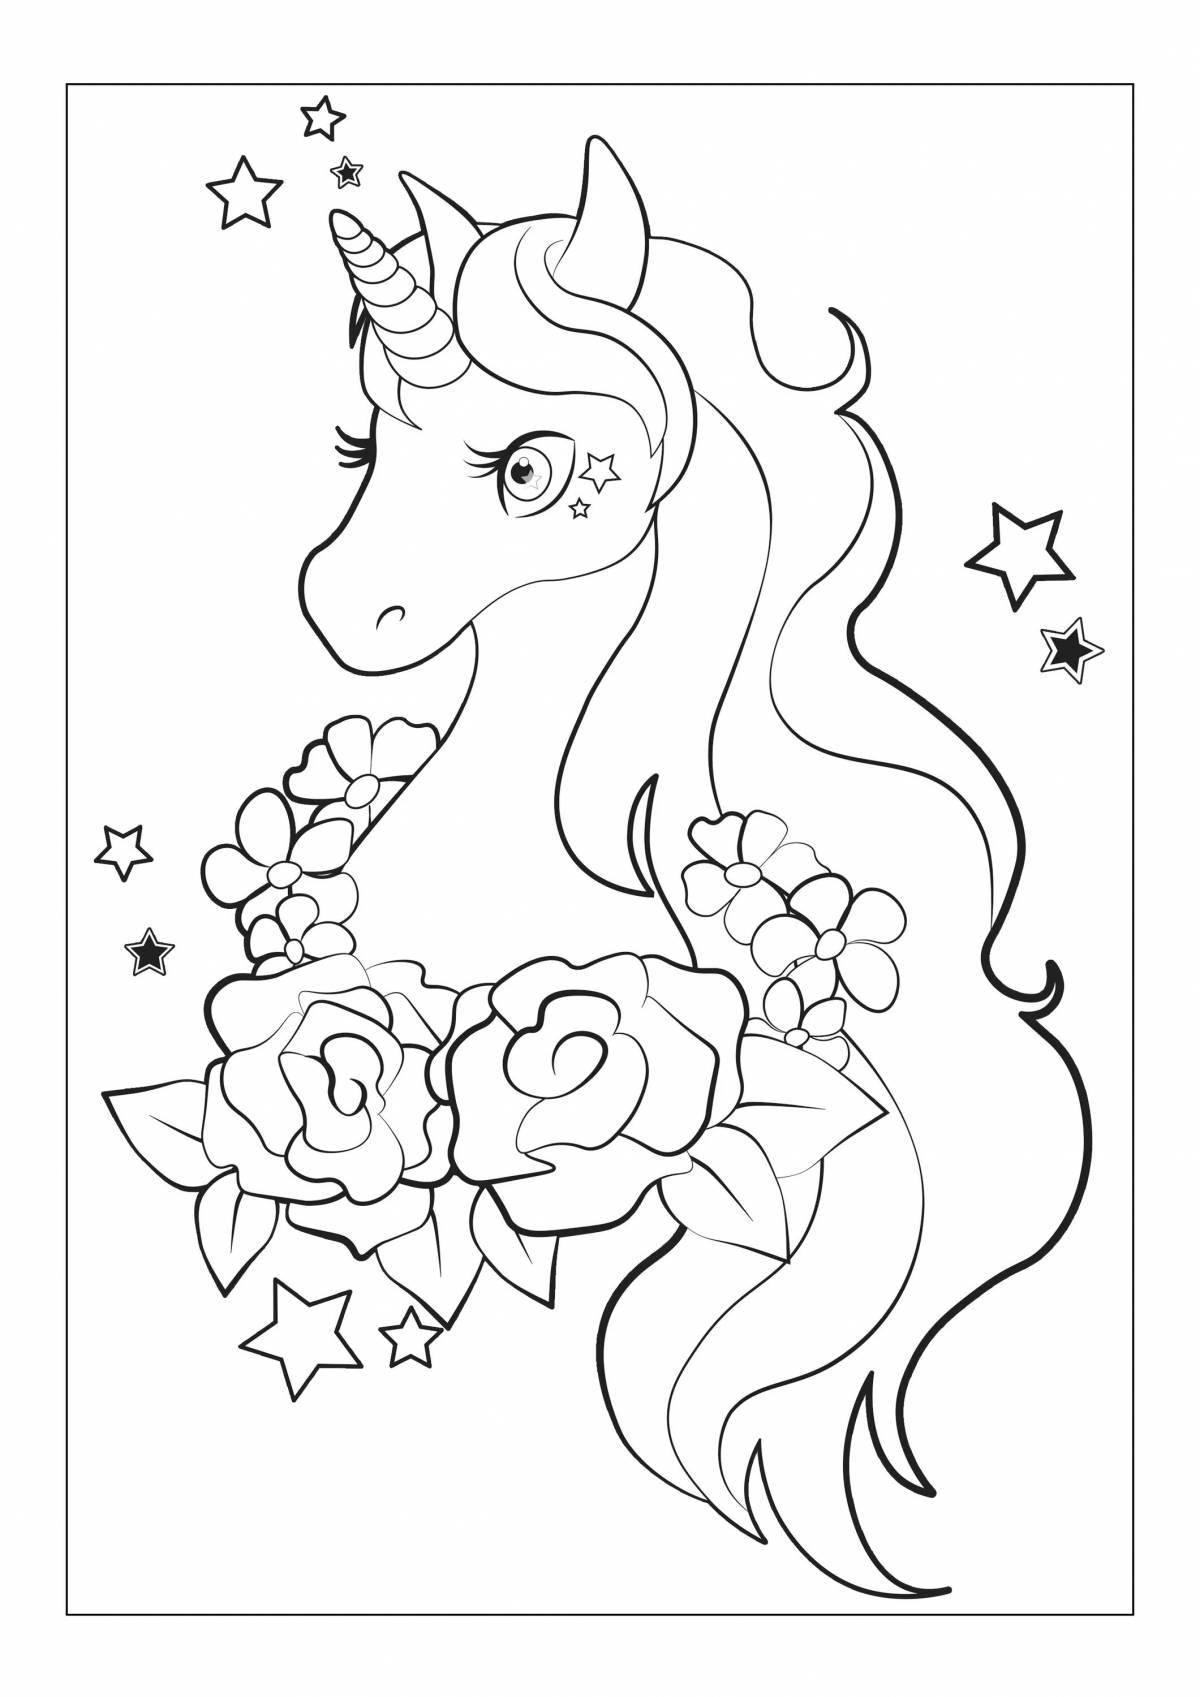 Coloring unicorn for kids